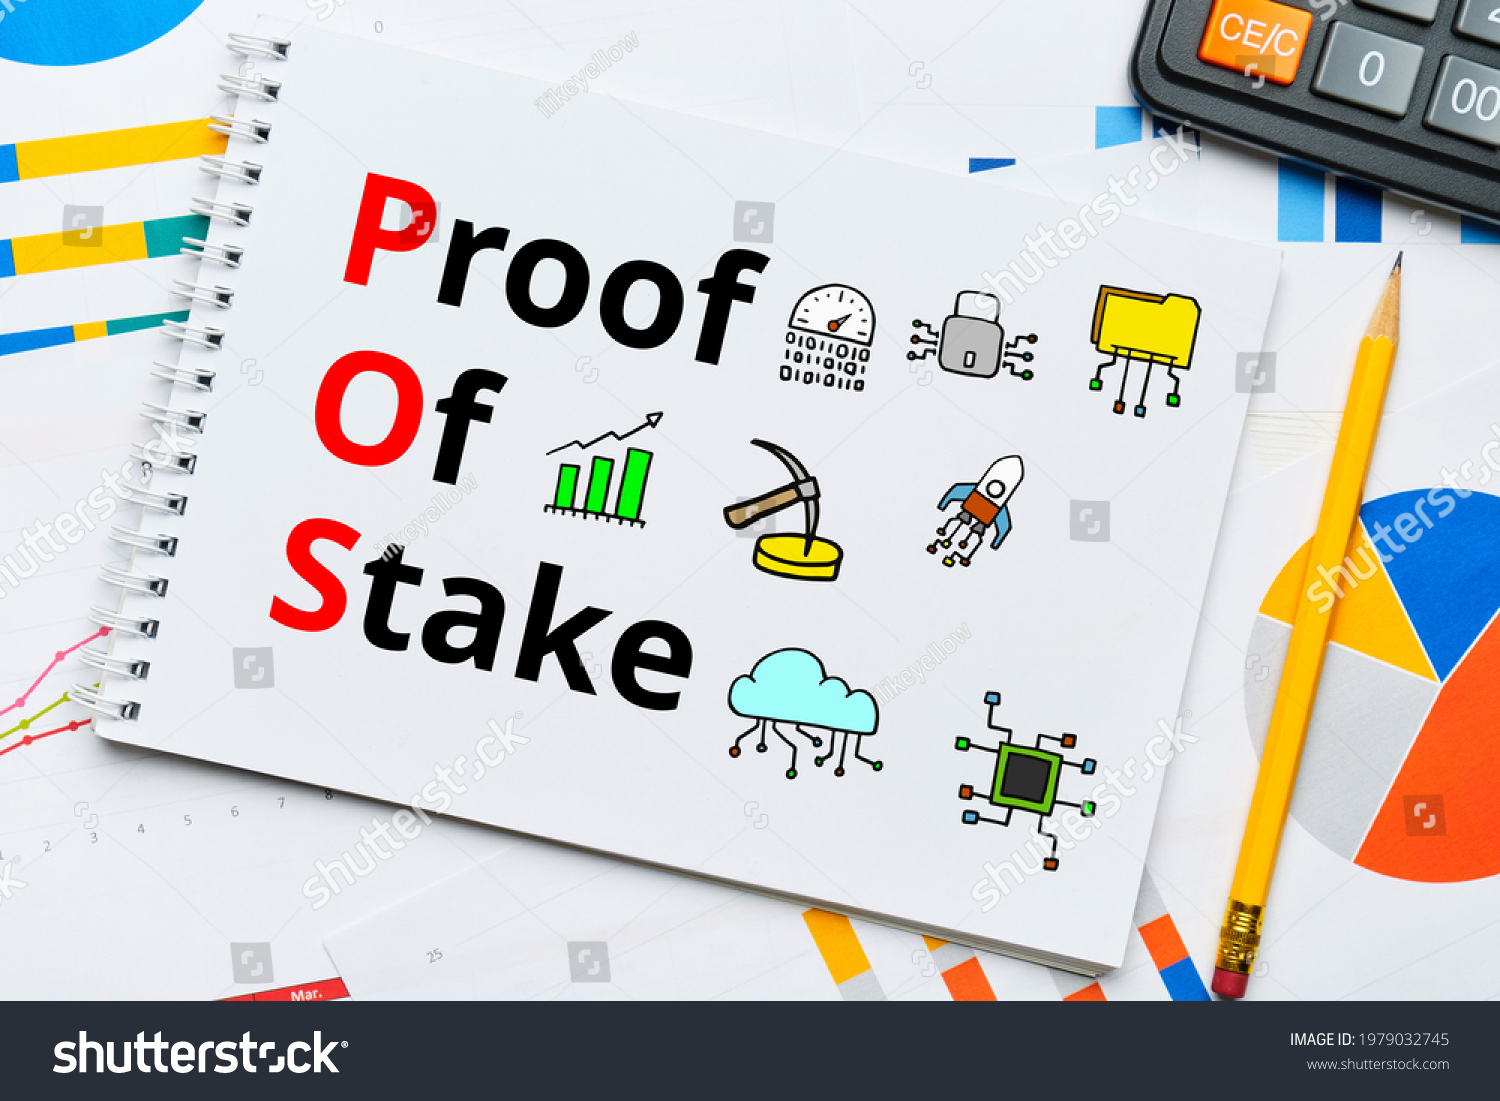 Concept pos and Proof of Stake with abstract icons #1979032745